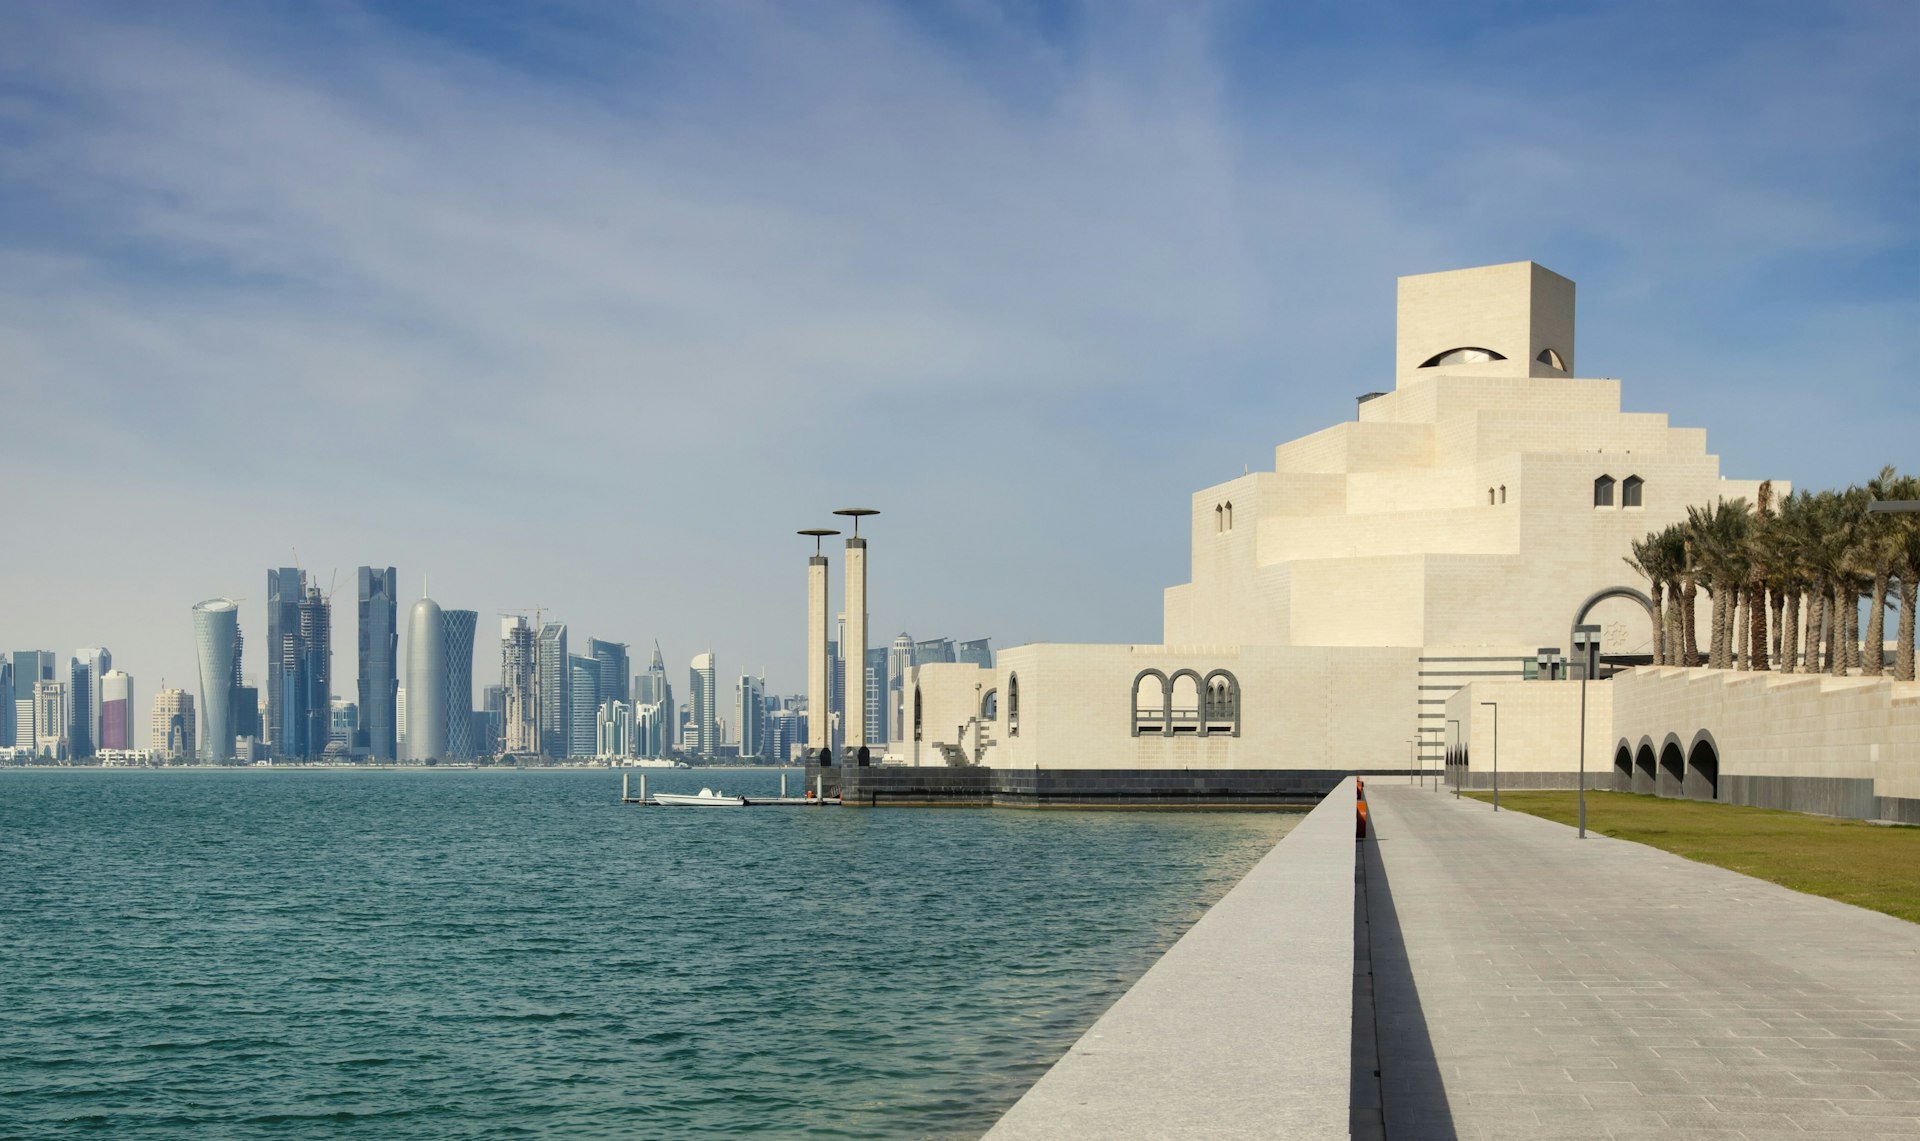 The Museum of Islamic Art juts out into the Doha's bay. Image by Marcus Lindstram / E+ / Getty Images 